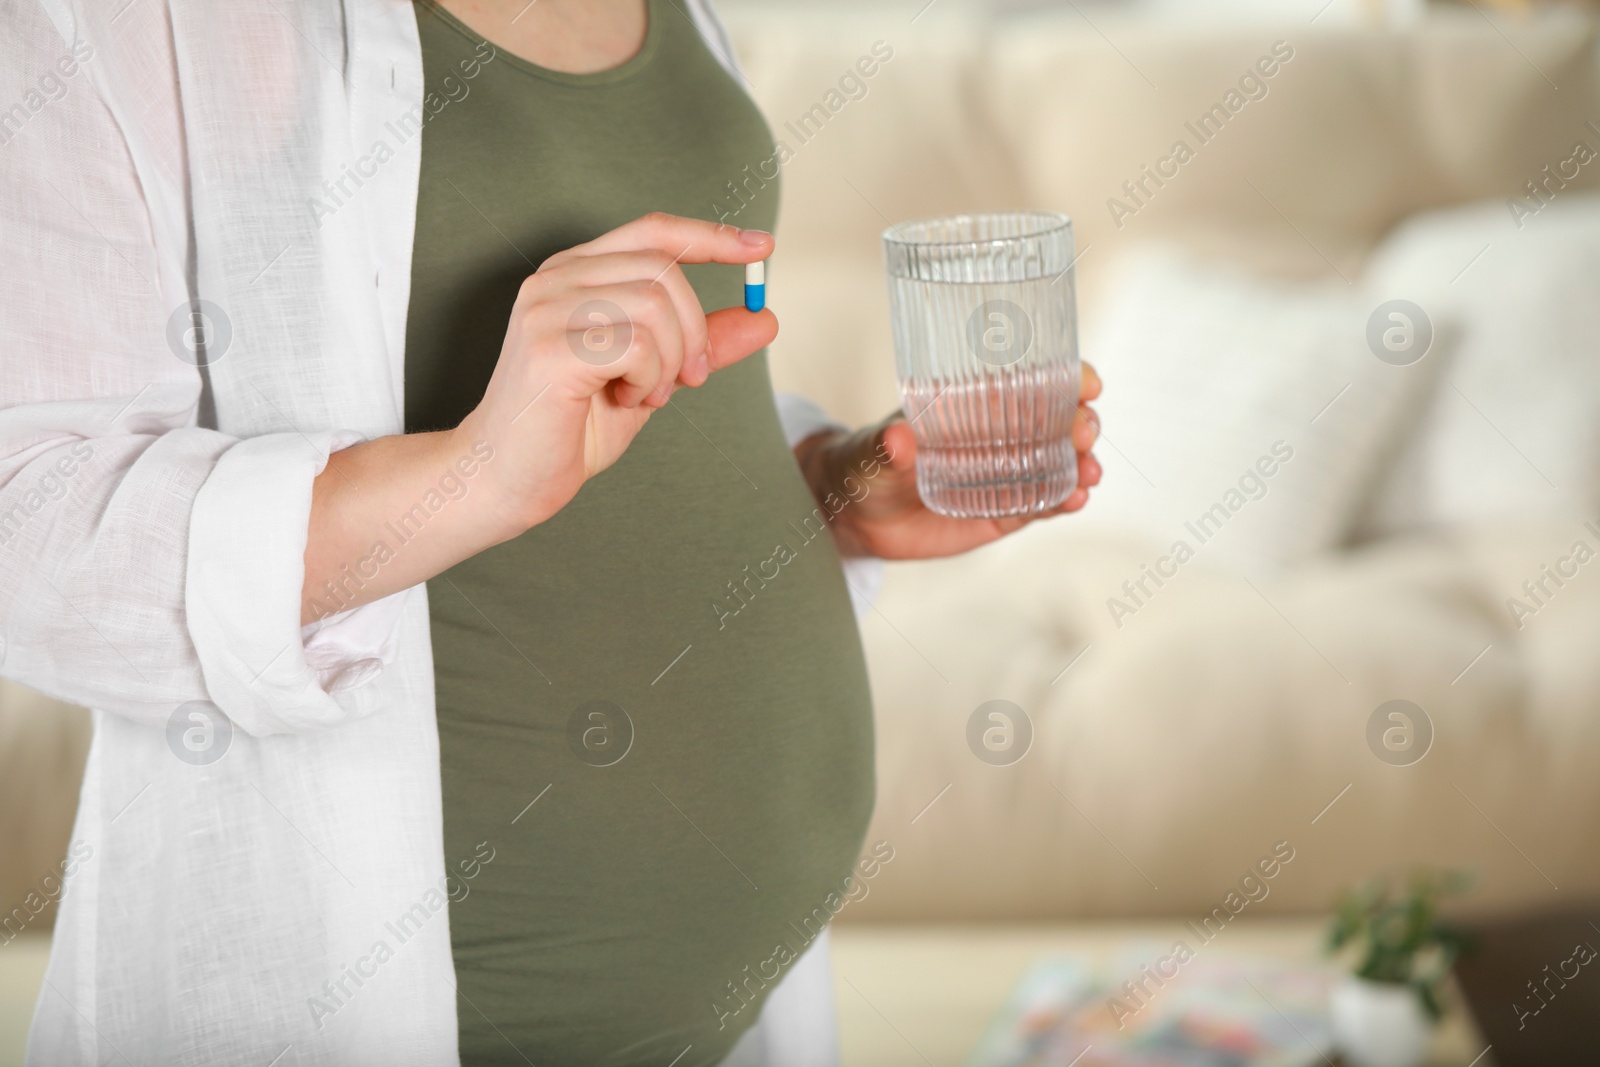 Photo of Pregnant woman holding pill and glass of water near sofa indoors, closeup